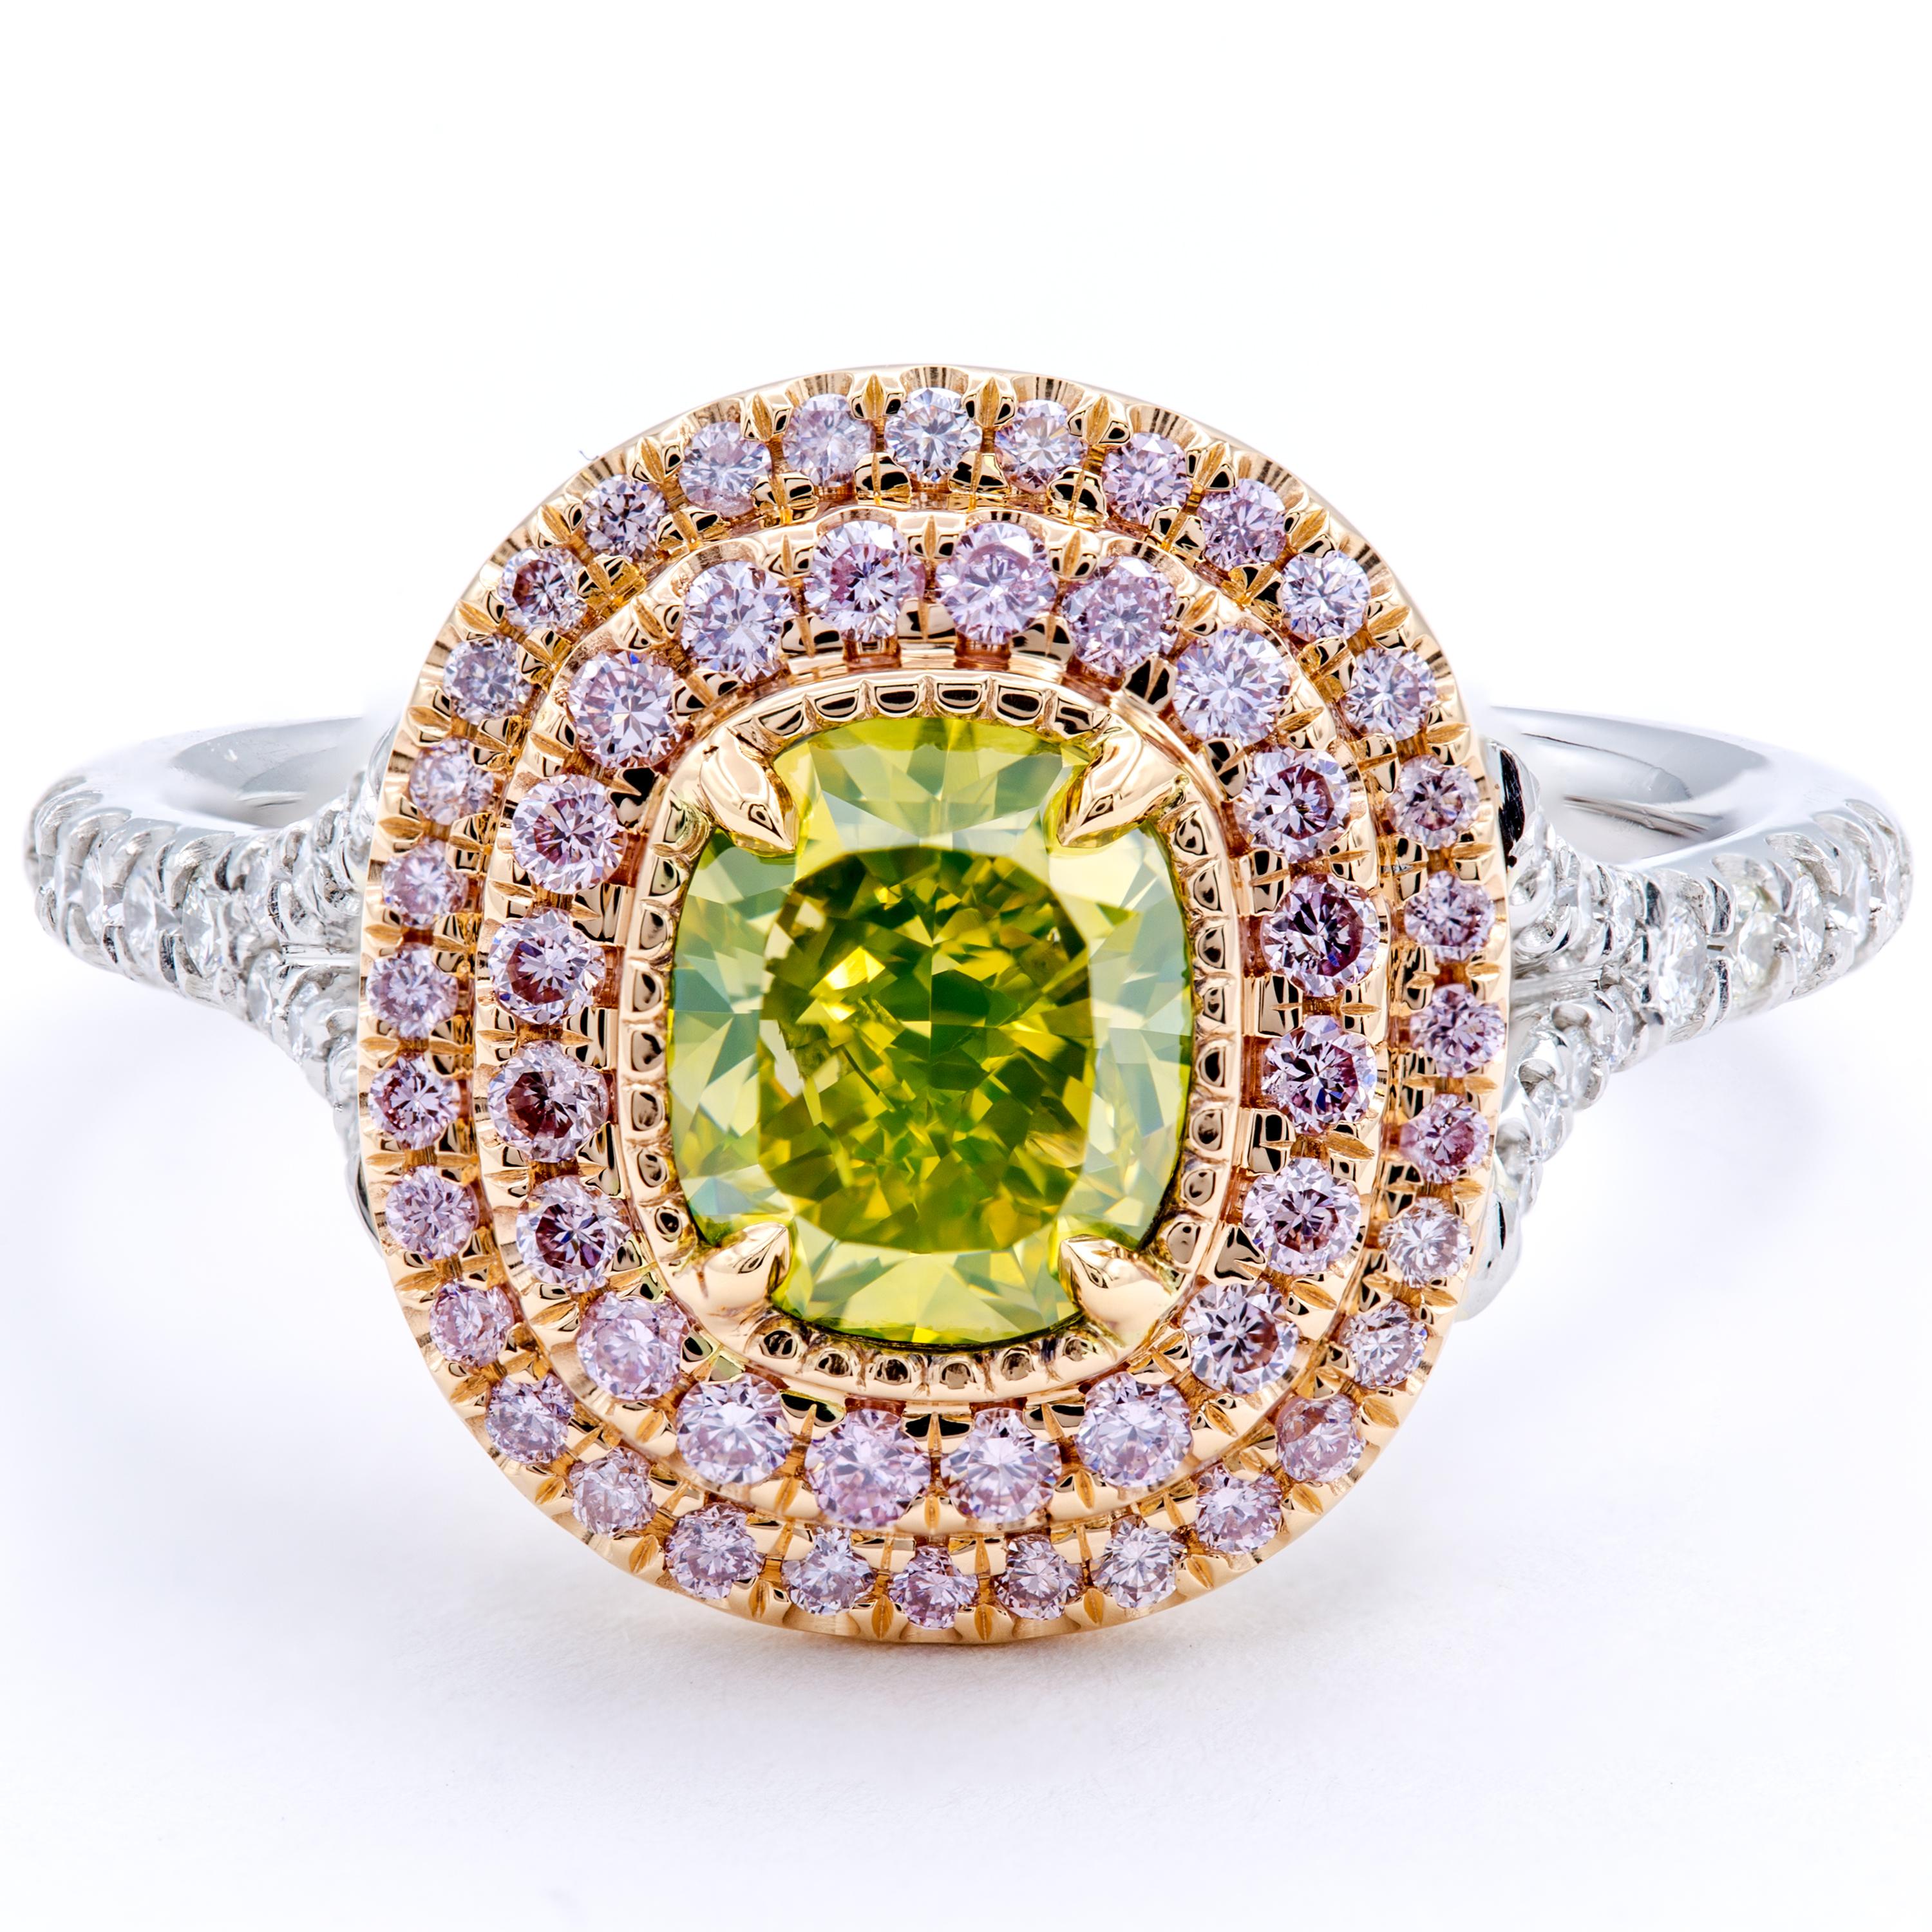 Gorgeous rows of natural fancy pink pavé diamonds caress a beautiful natural fancy intense greenish yellow cushion cut diamond center stone. The band uses both platinum and 18Kt white and yellow gold to secure the stones and includes round brilliant